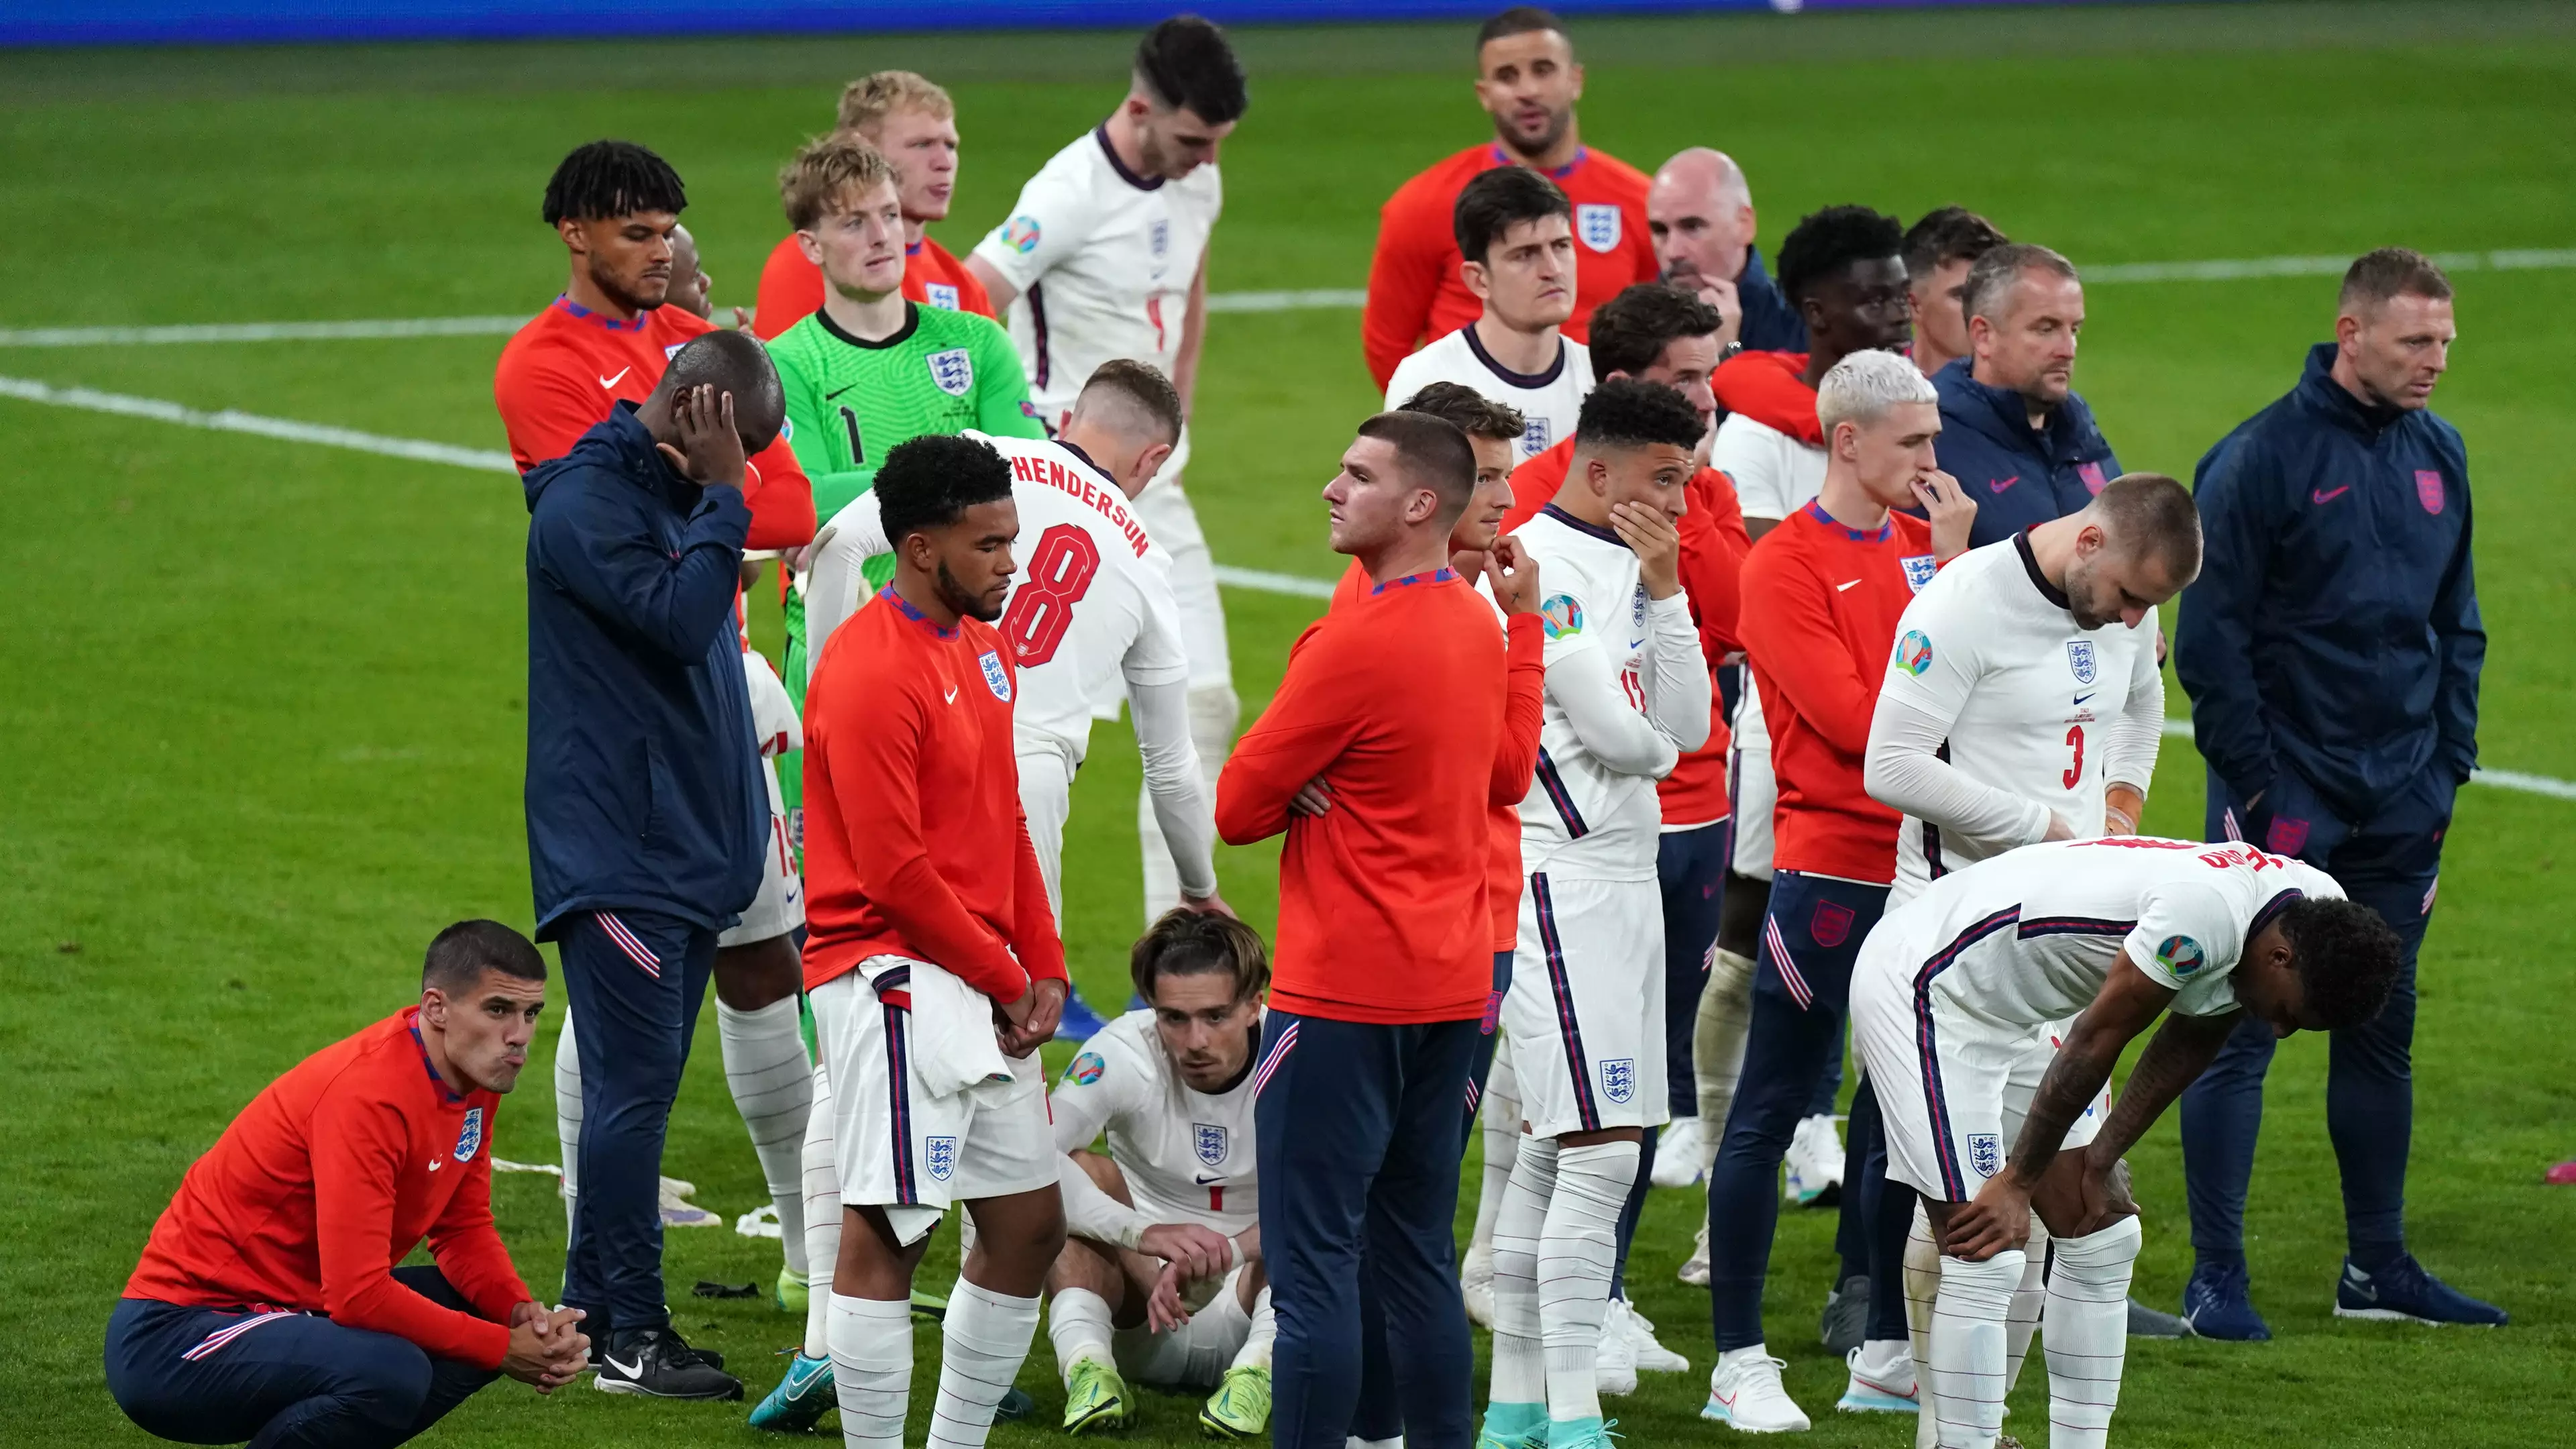 Footage Appears To Show Southgate's Choice To Take England’s Next Penalties